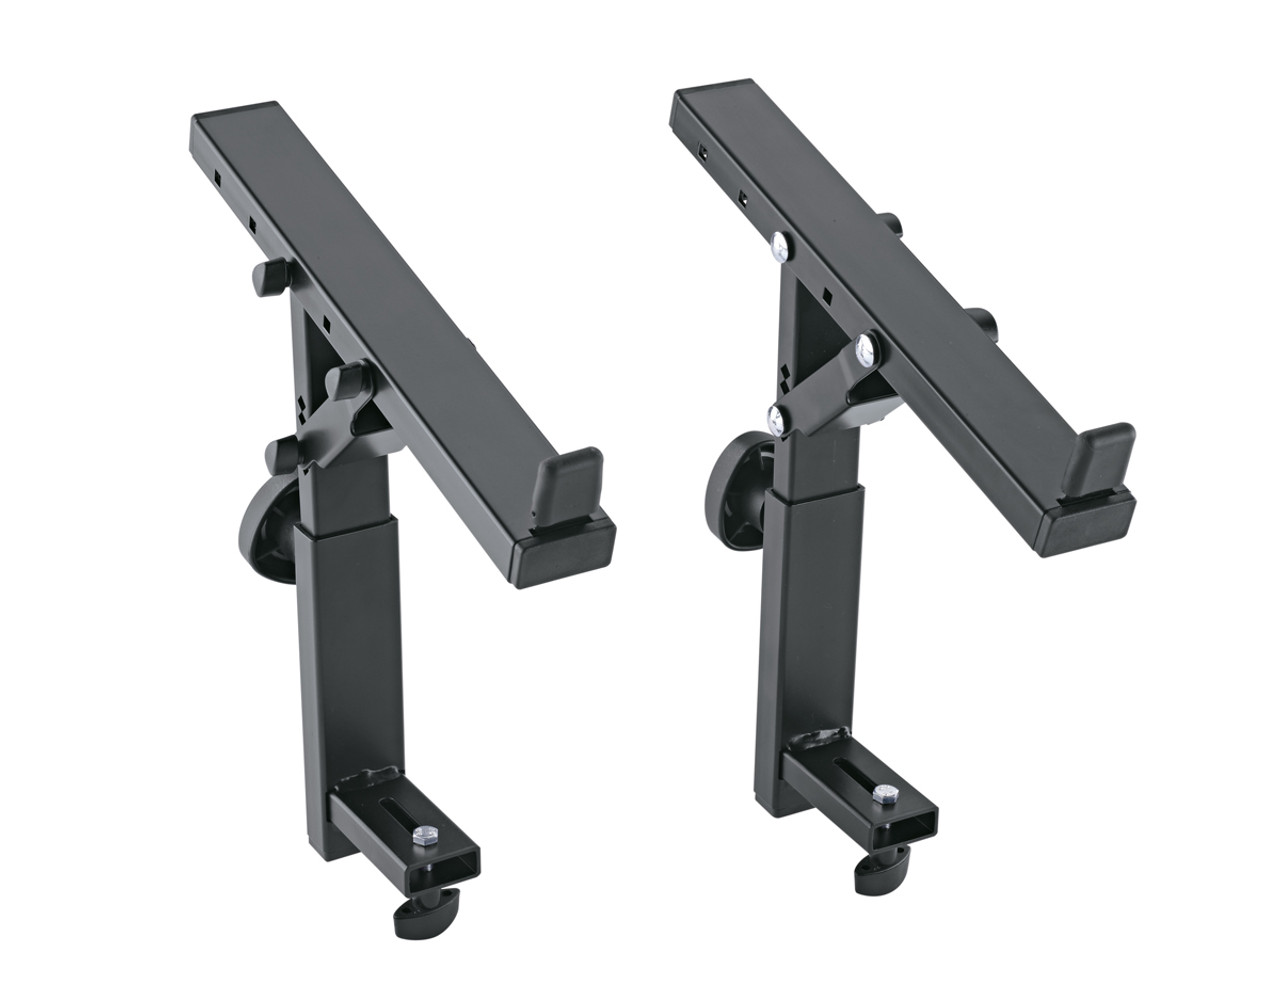 Third　18822　in　18810/18820　Stand　Stacker　for　Tier　KM　Black